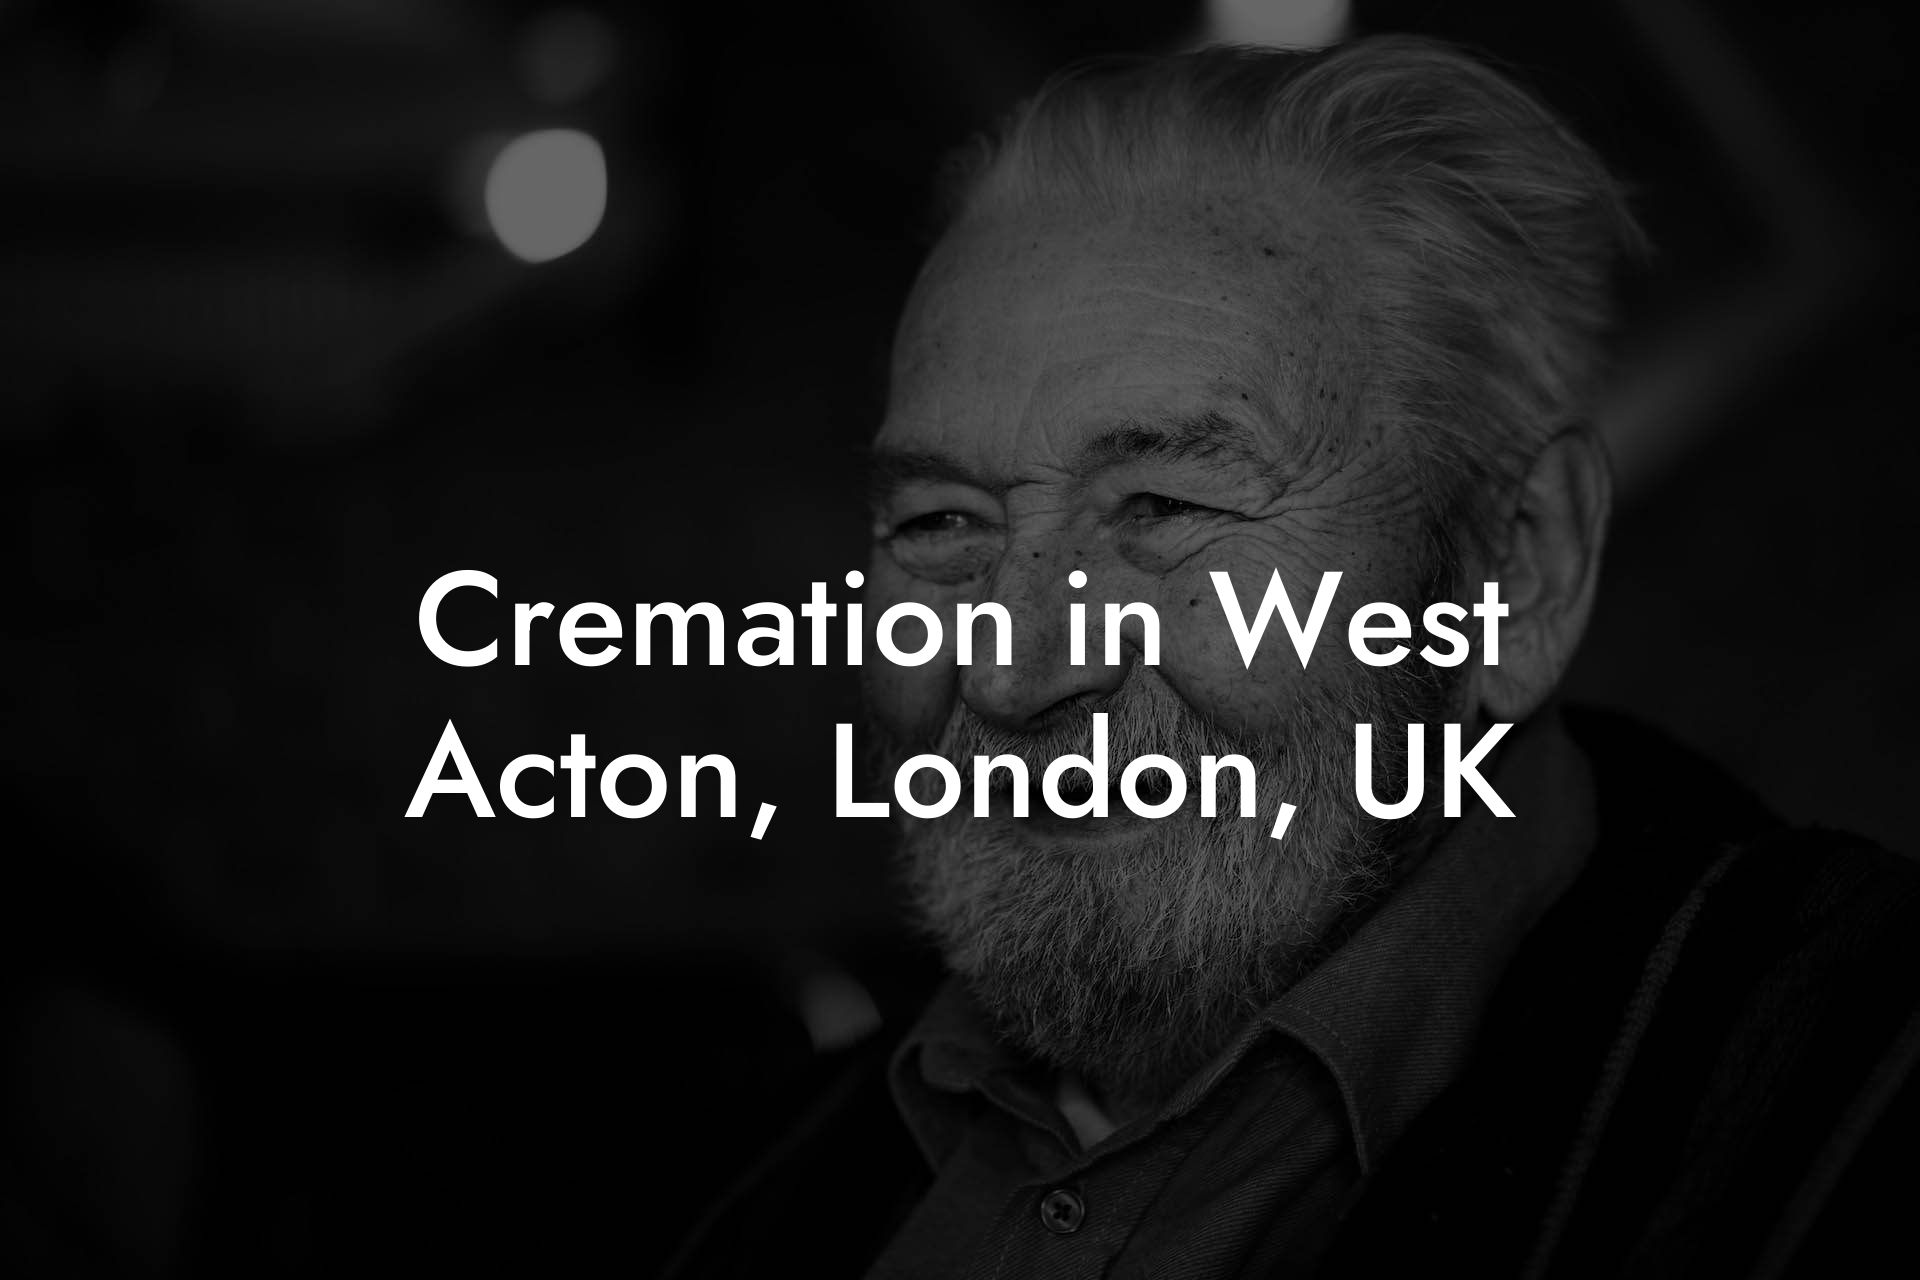 Cremation in West Acton, London, UK